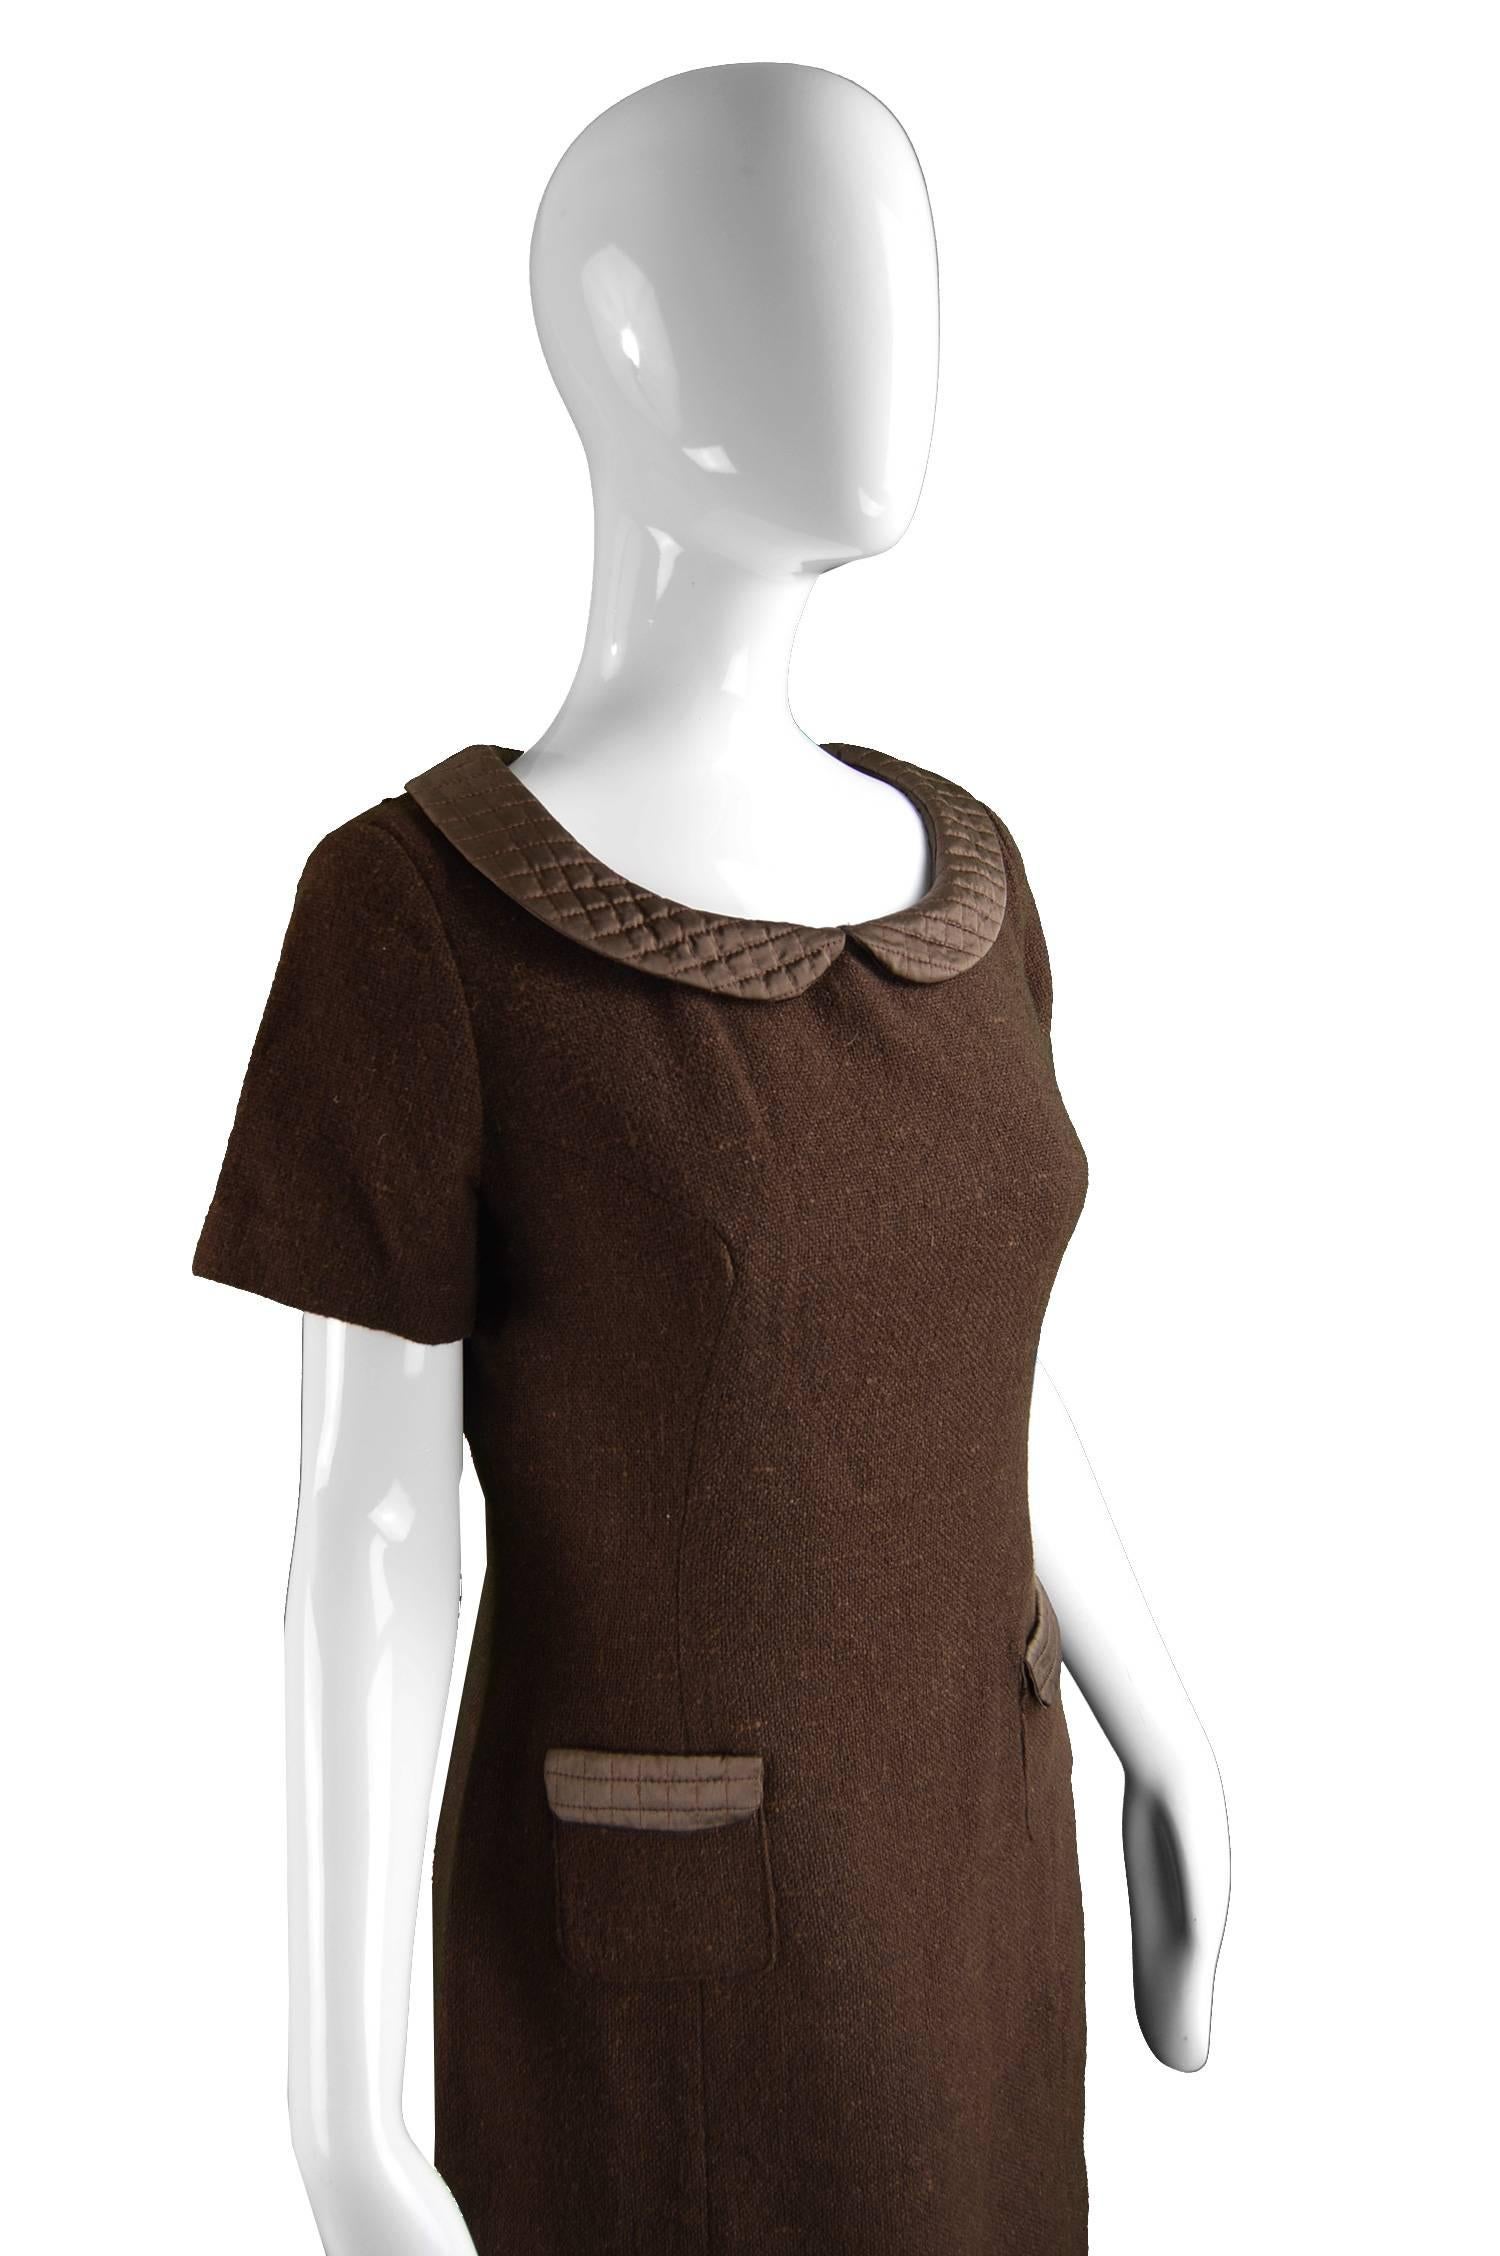 Women's Marcel Fenez Vintage Brown Wool Dress with Quilted Peter Pan Collar 1960s